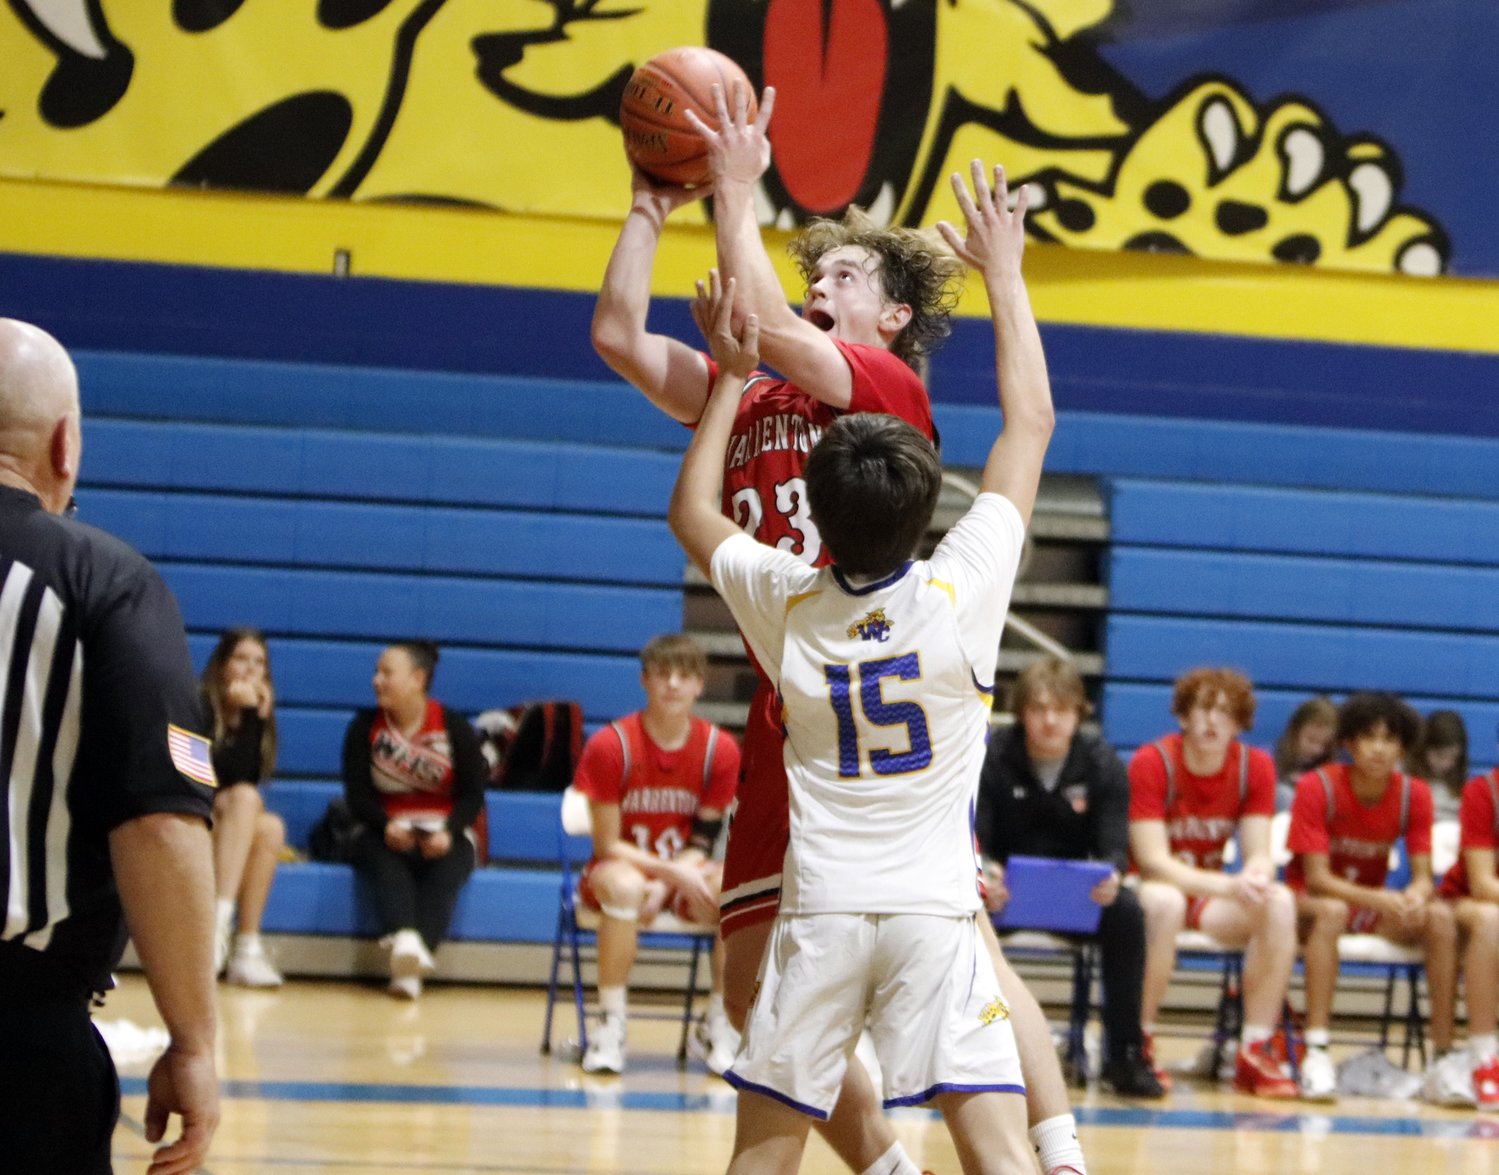 Warrenton senior Kannon Hibbs (23) prepares to shoot the ball over Wright City junior Jerry Stanford during the second half of Warrenton’s win over Wright City last Friday.